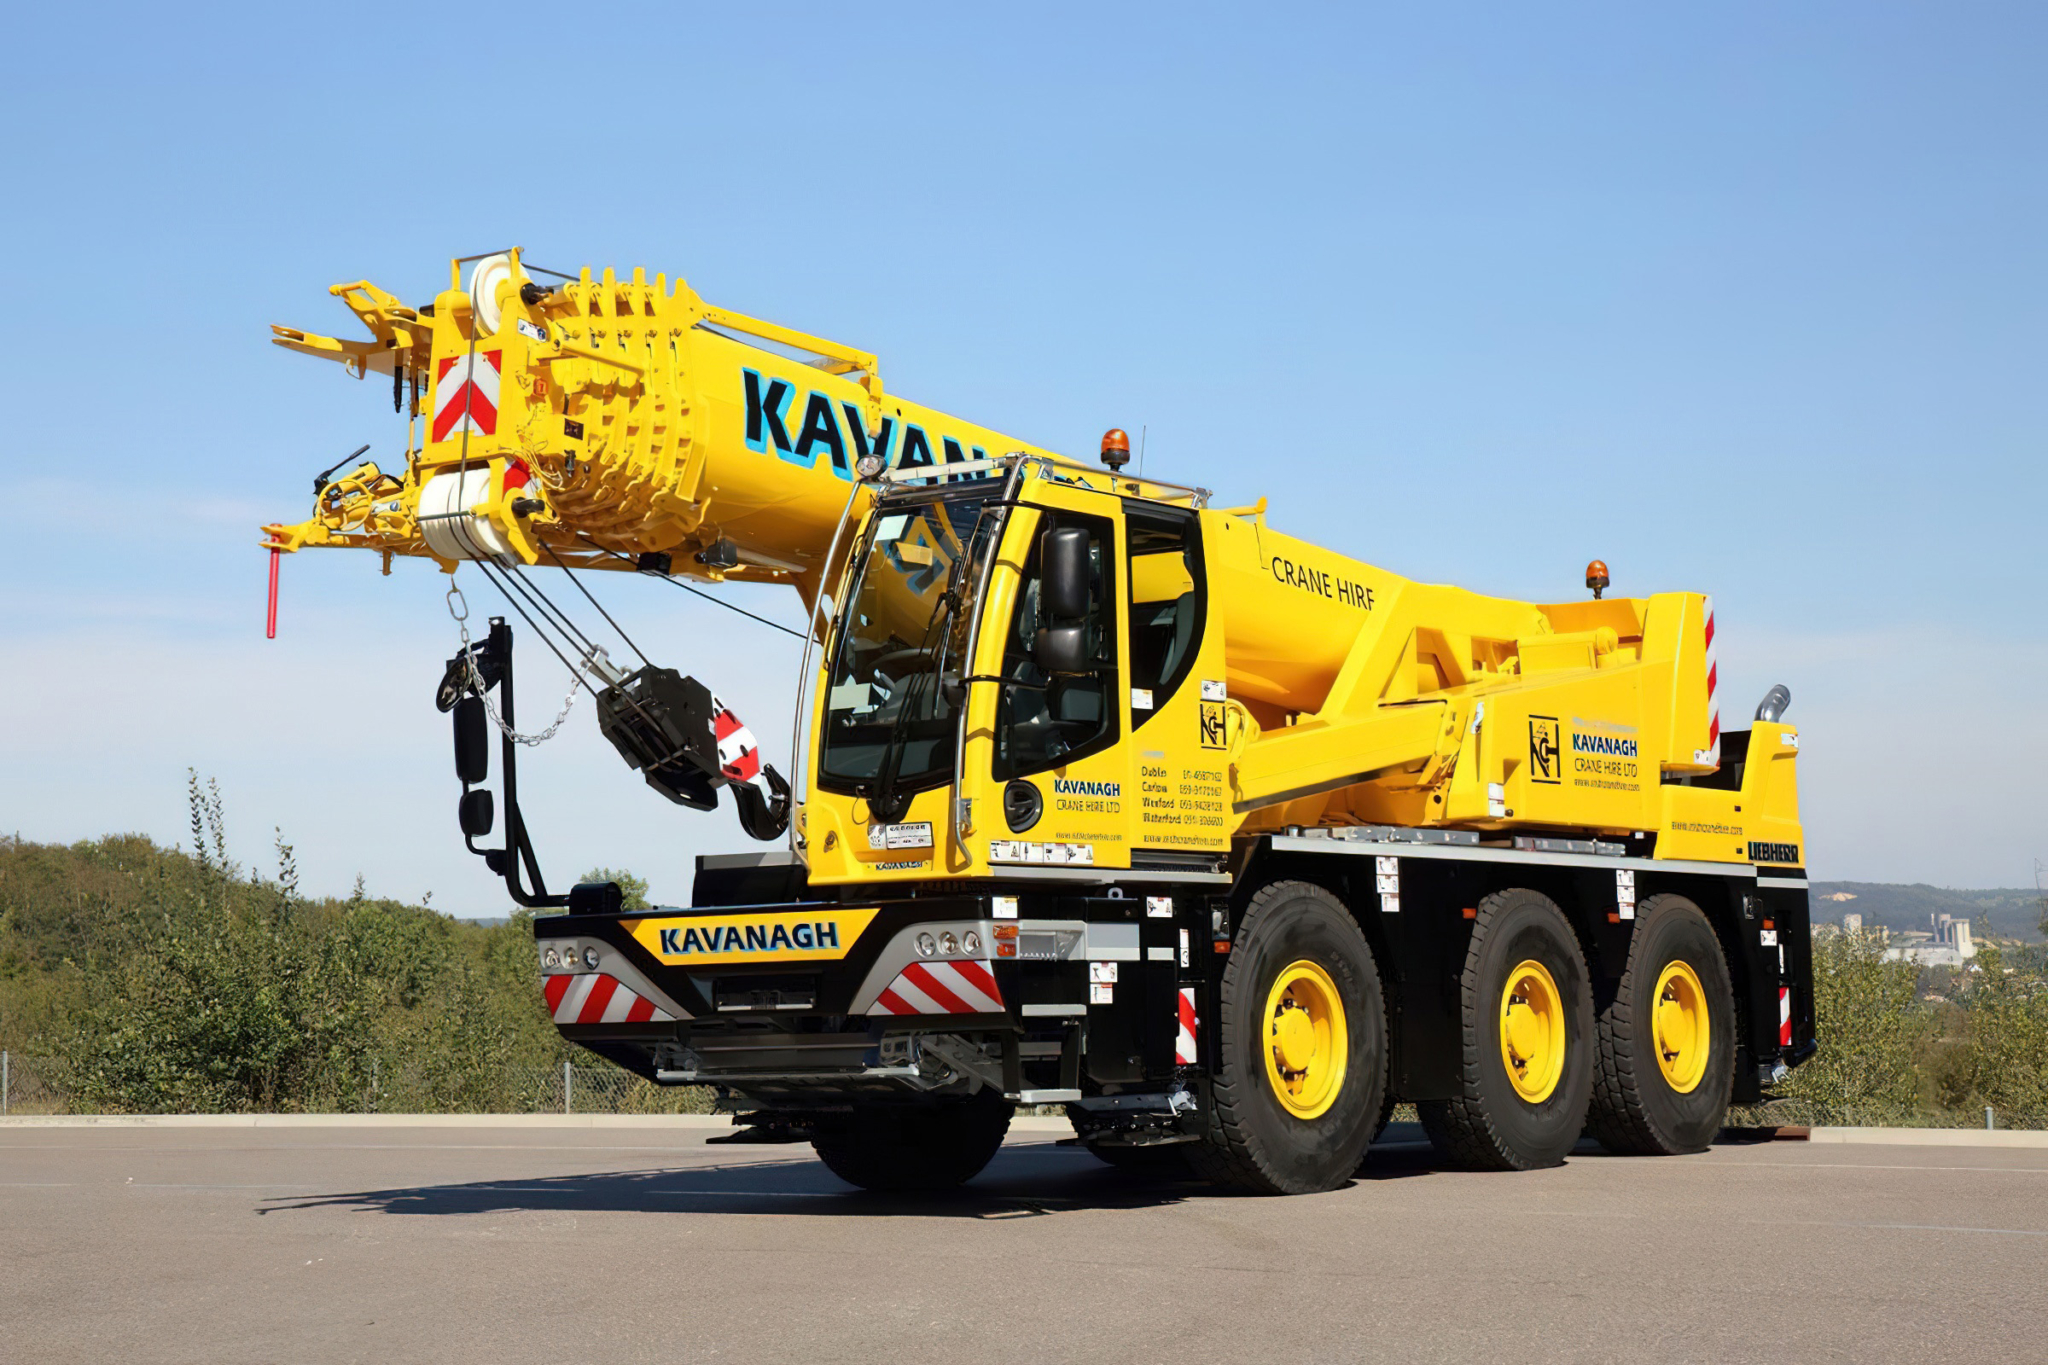 Michelin: X Crane tyres take Kavanagh hire fleet to new heights